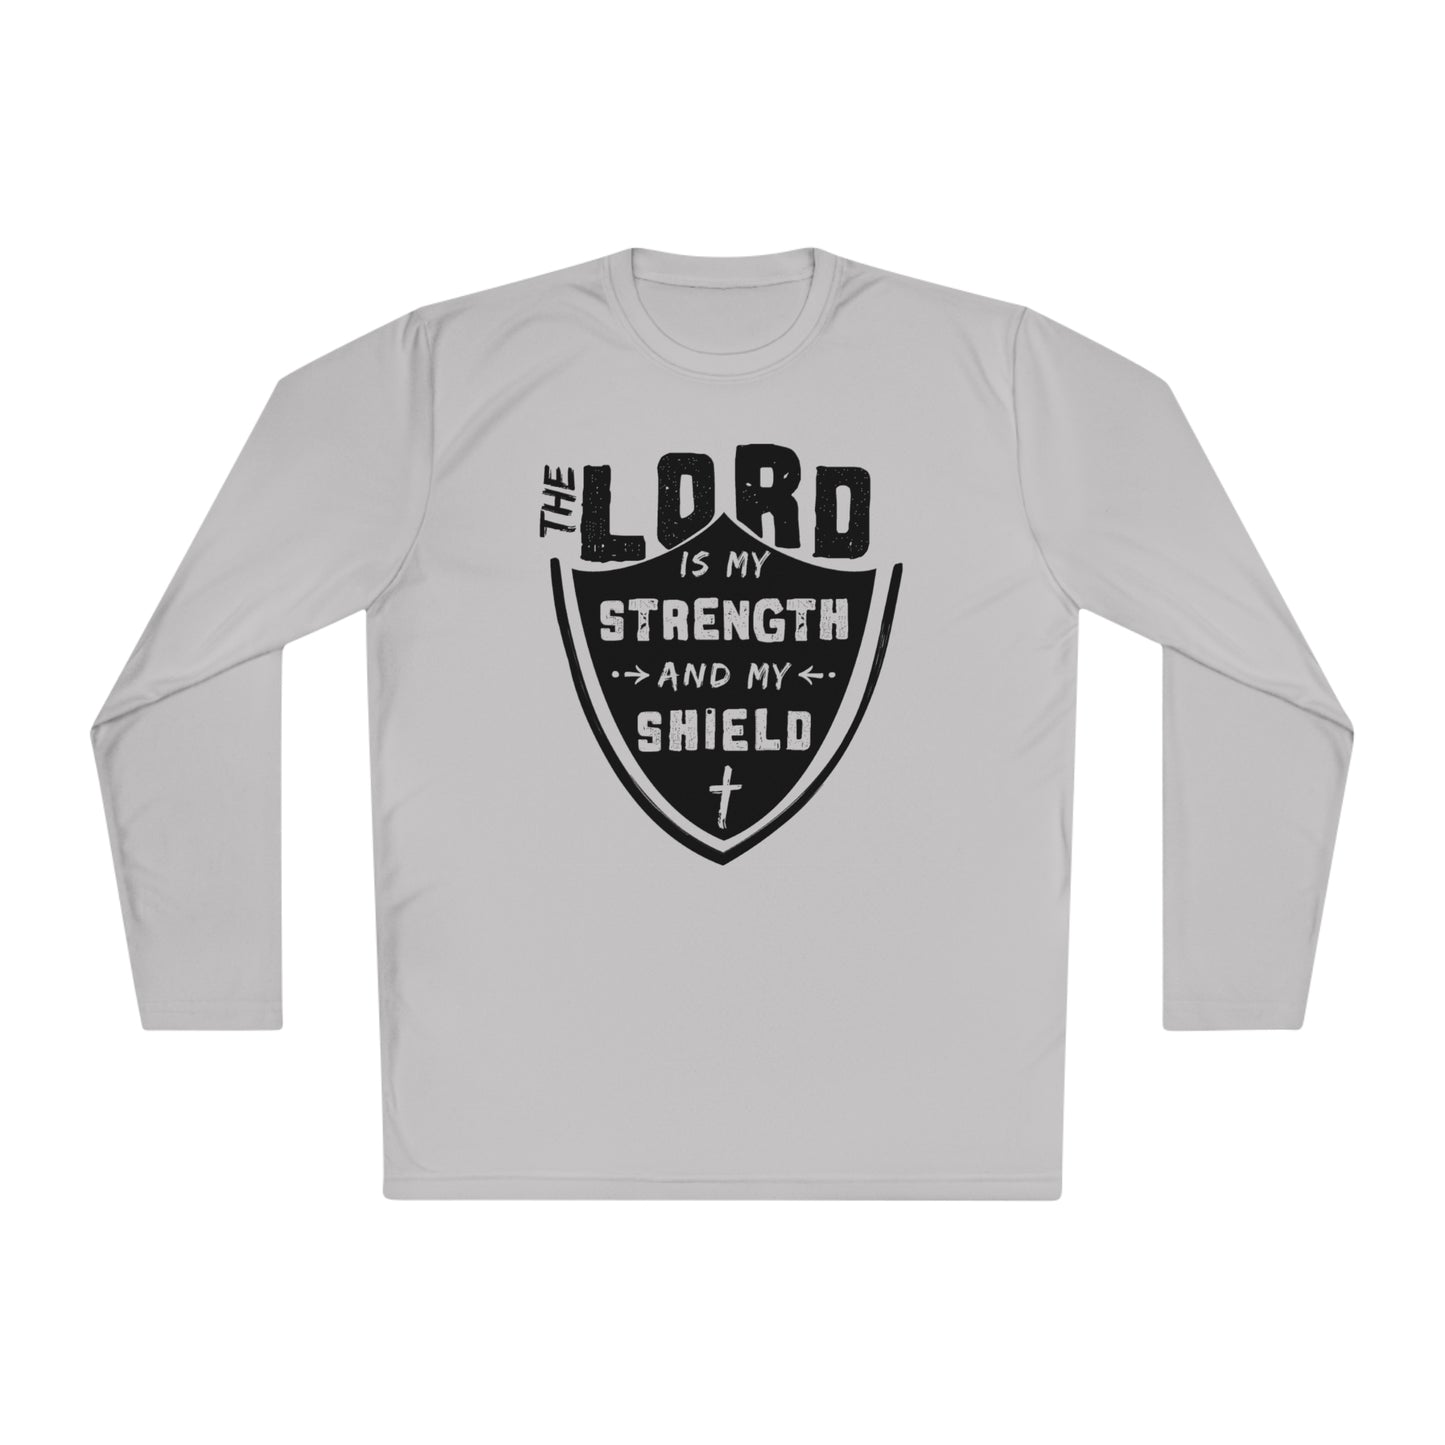 Strength and Shield Long Sleeve T-Shirt